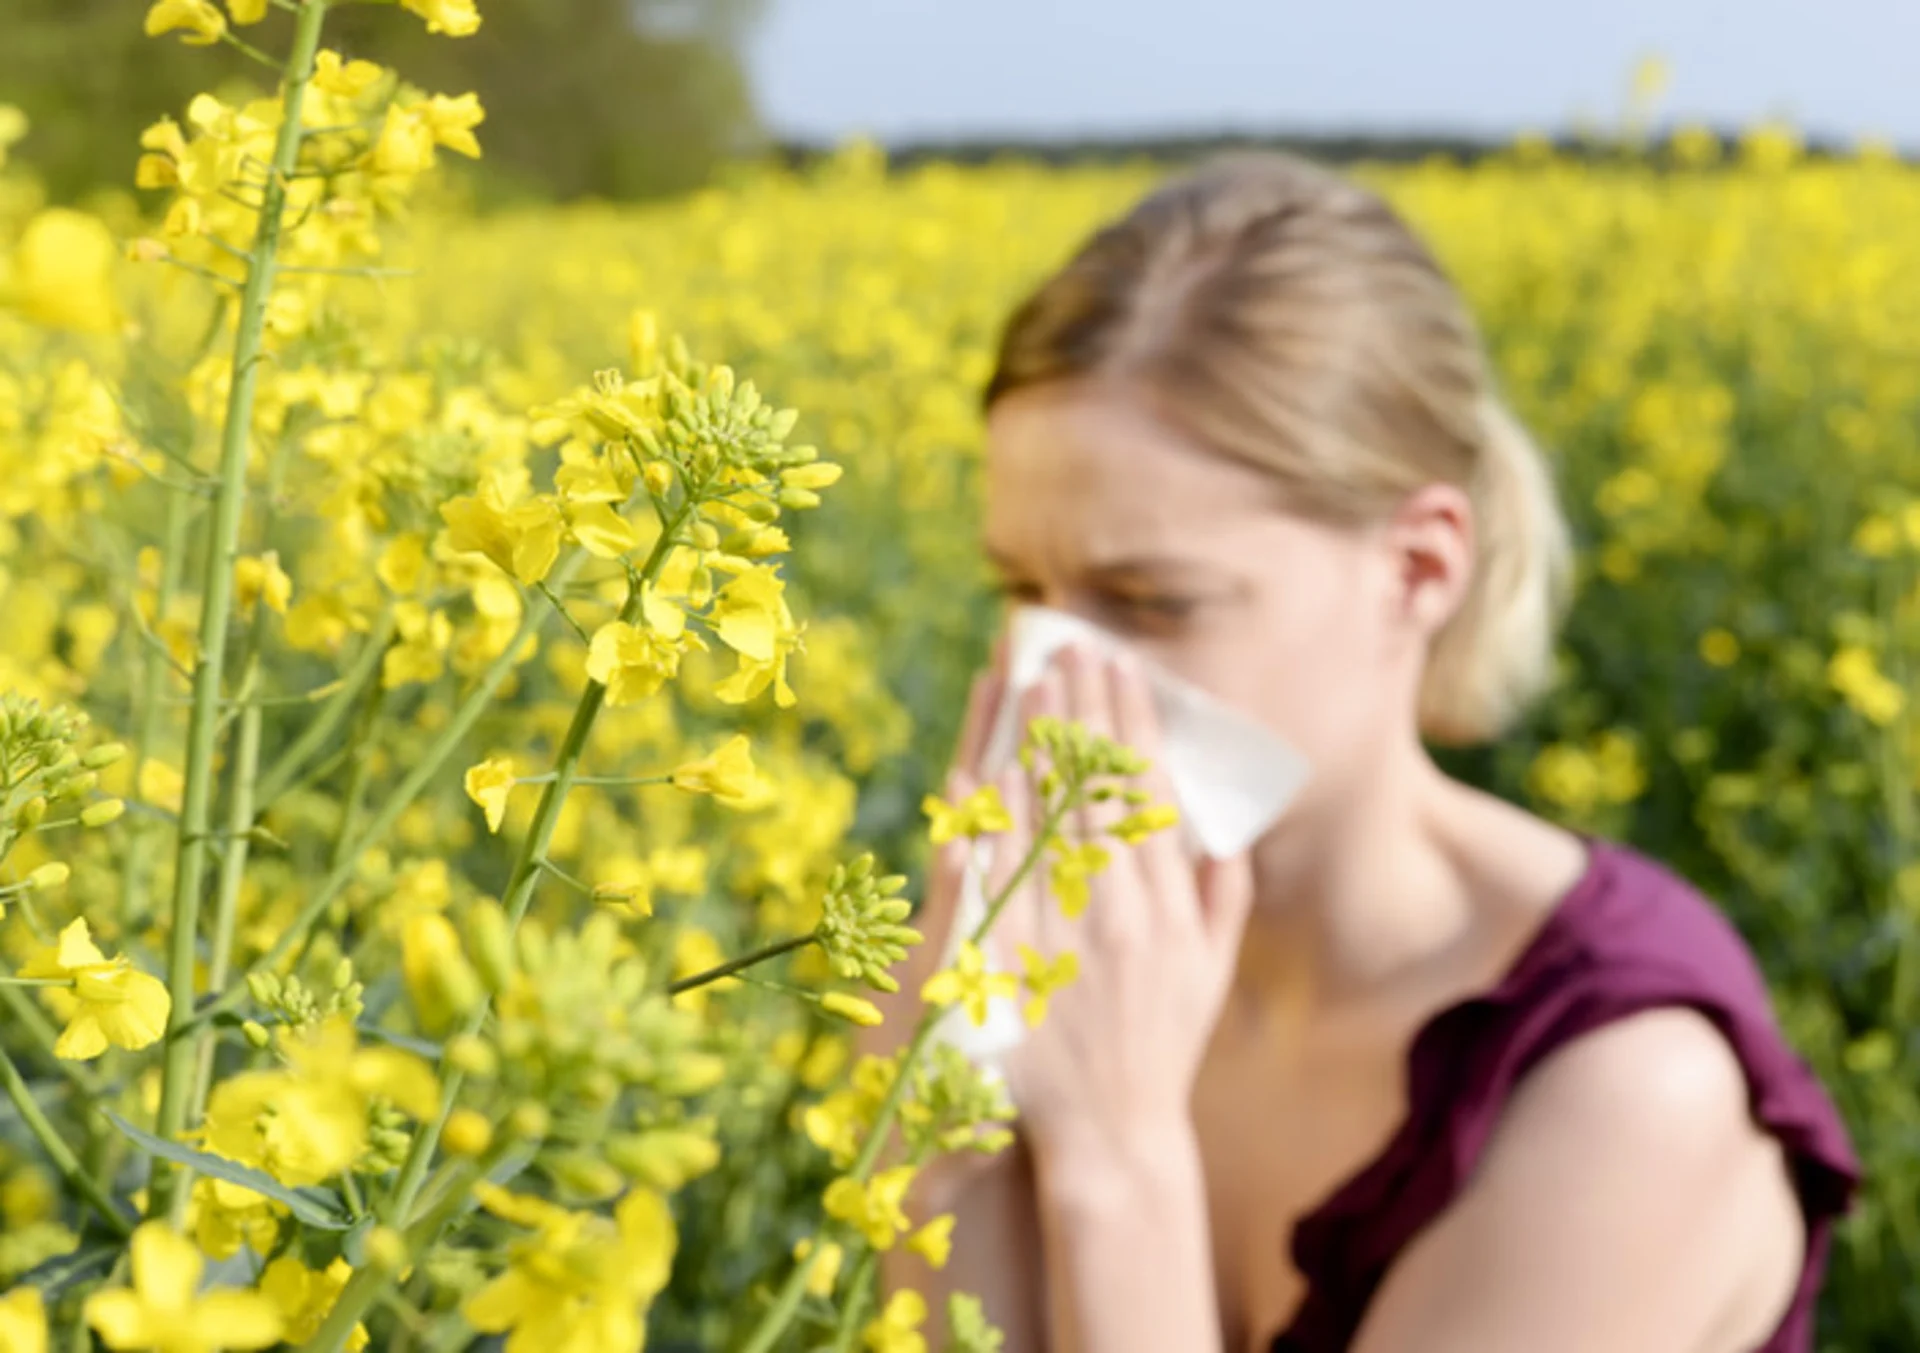 Your season of birth can affect your risk of allergies, here's how